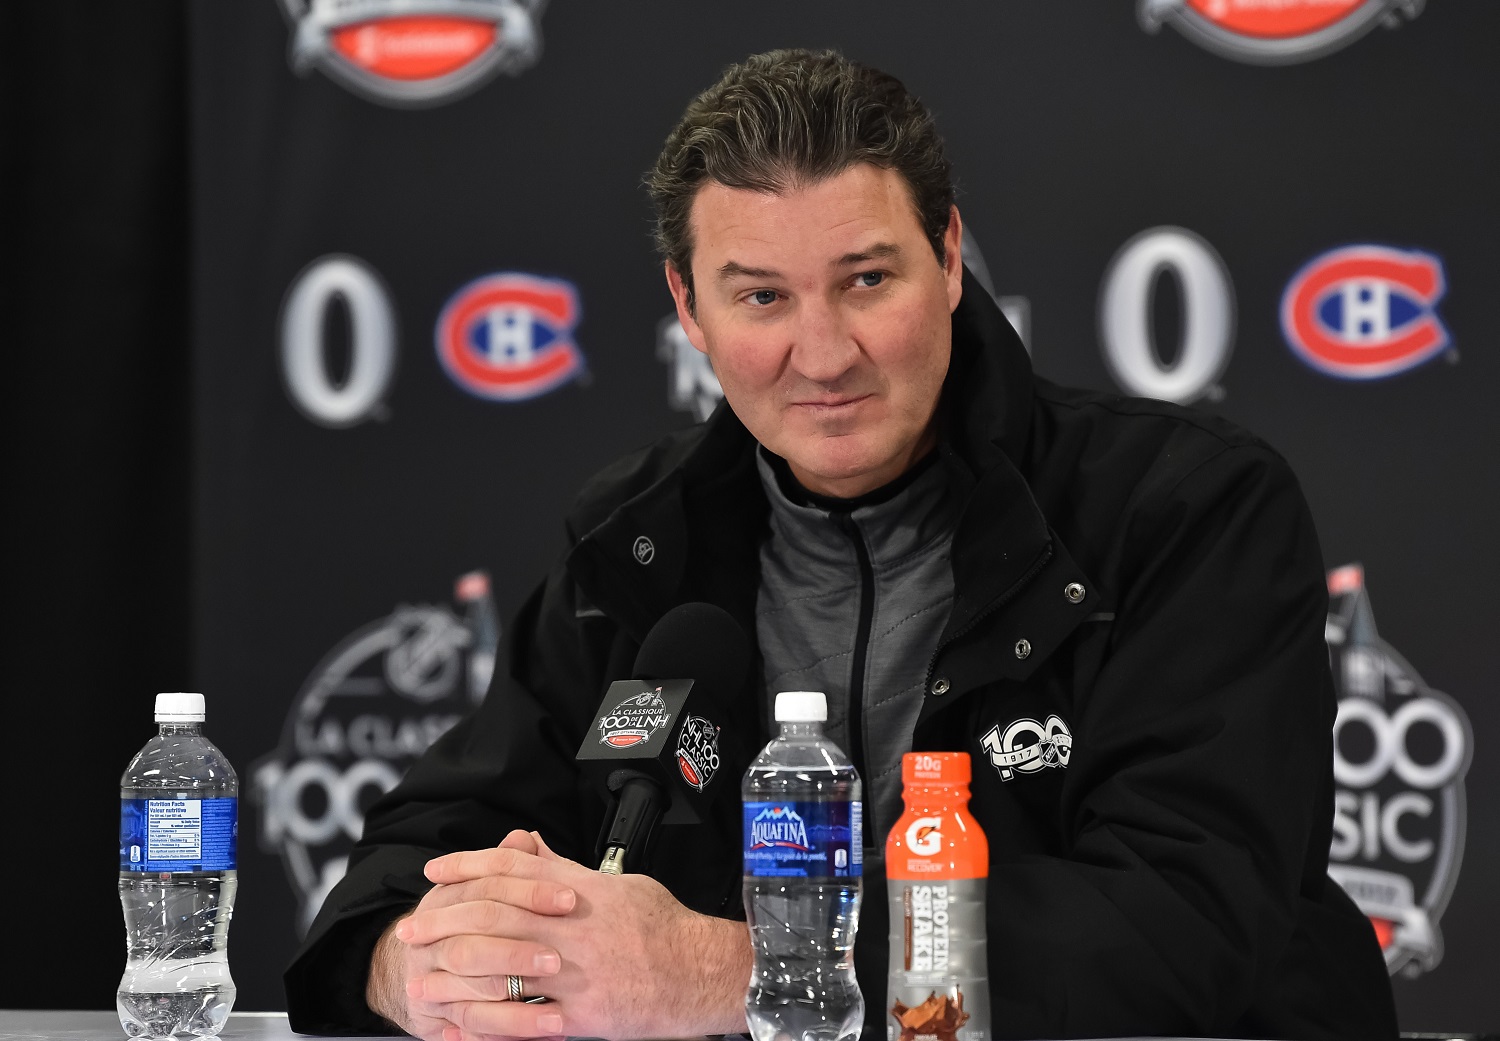 NHL legend Mario Lemieux talks to the media during the 2017 Scotiabank NHL100 Classic at Lansdowne Park on Dec. 16, 2017, in Ottawa, Canada.